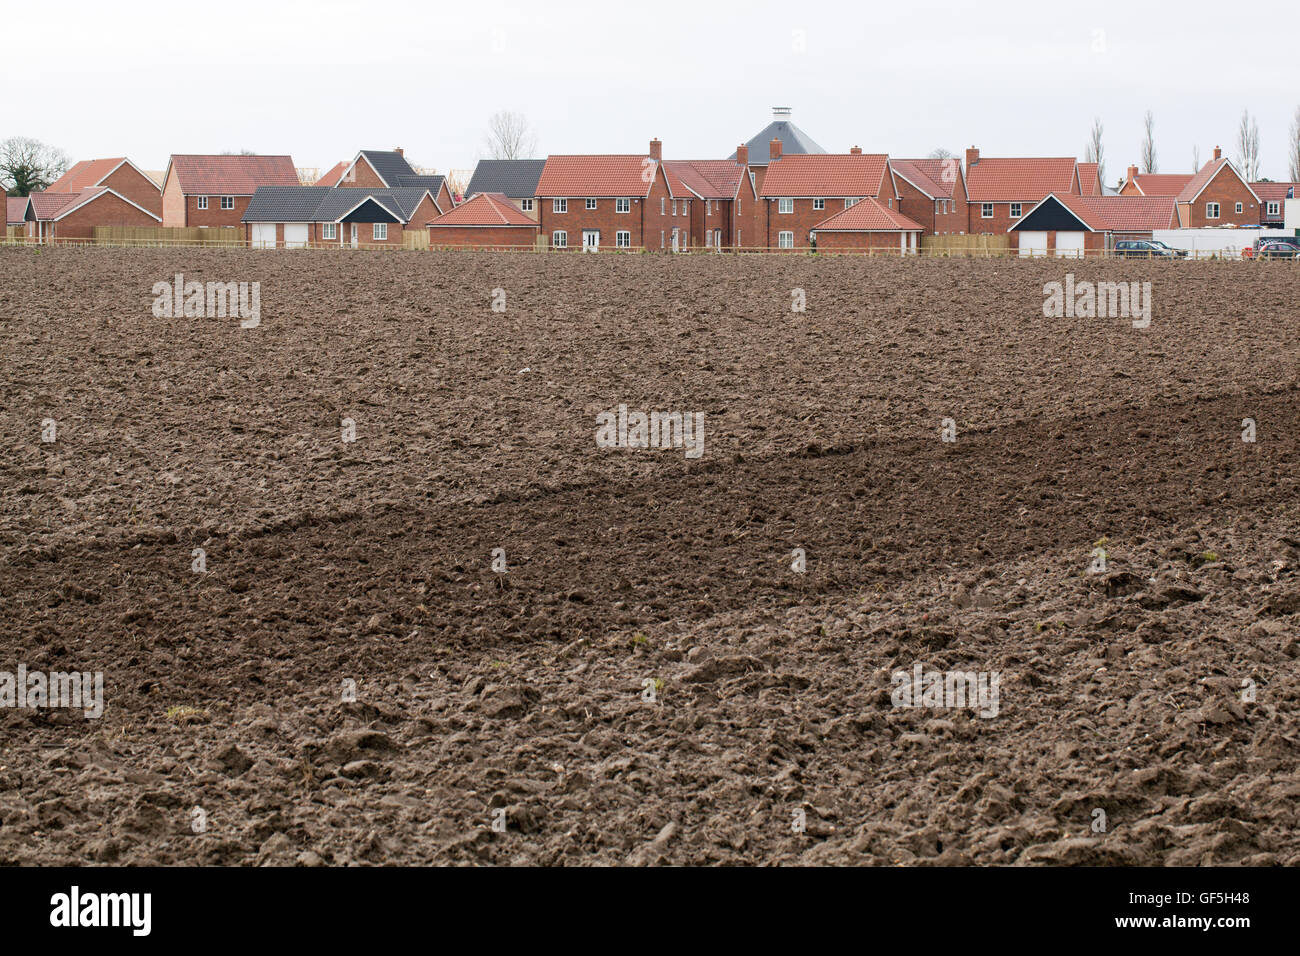 New Housing Estate built on former agricultural land. Stalham. Norfolk. East Anglia. England. Stock Photo